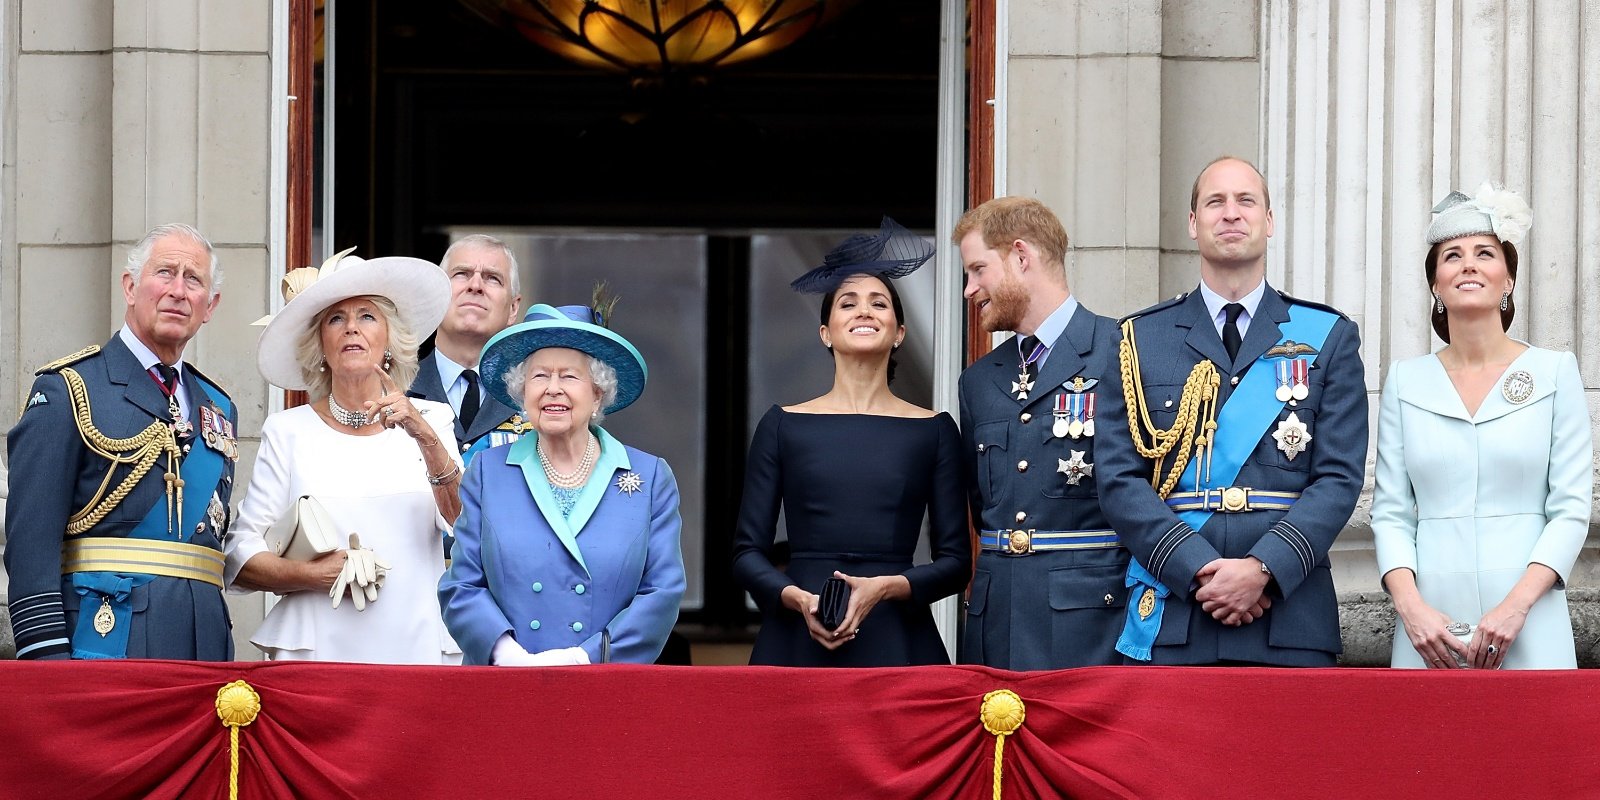 king charles, camilla parker bowles, prince andrew, queen elizabeth, meghan markle, prince harry, prince william and kate middleton in 2018 on the Buckingham Palace balcony.